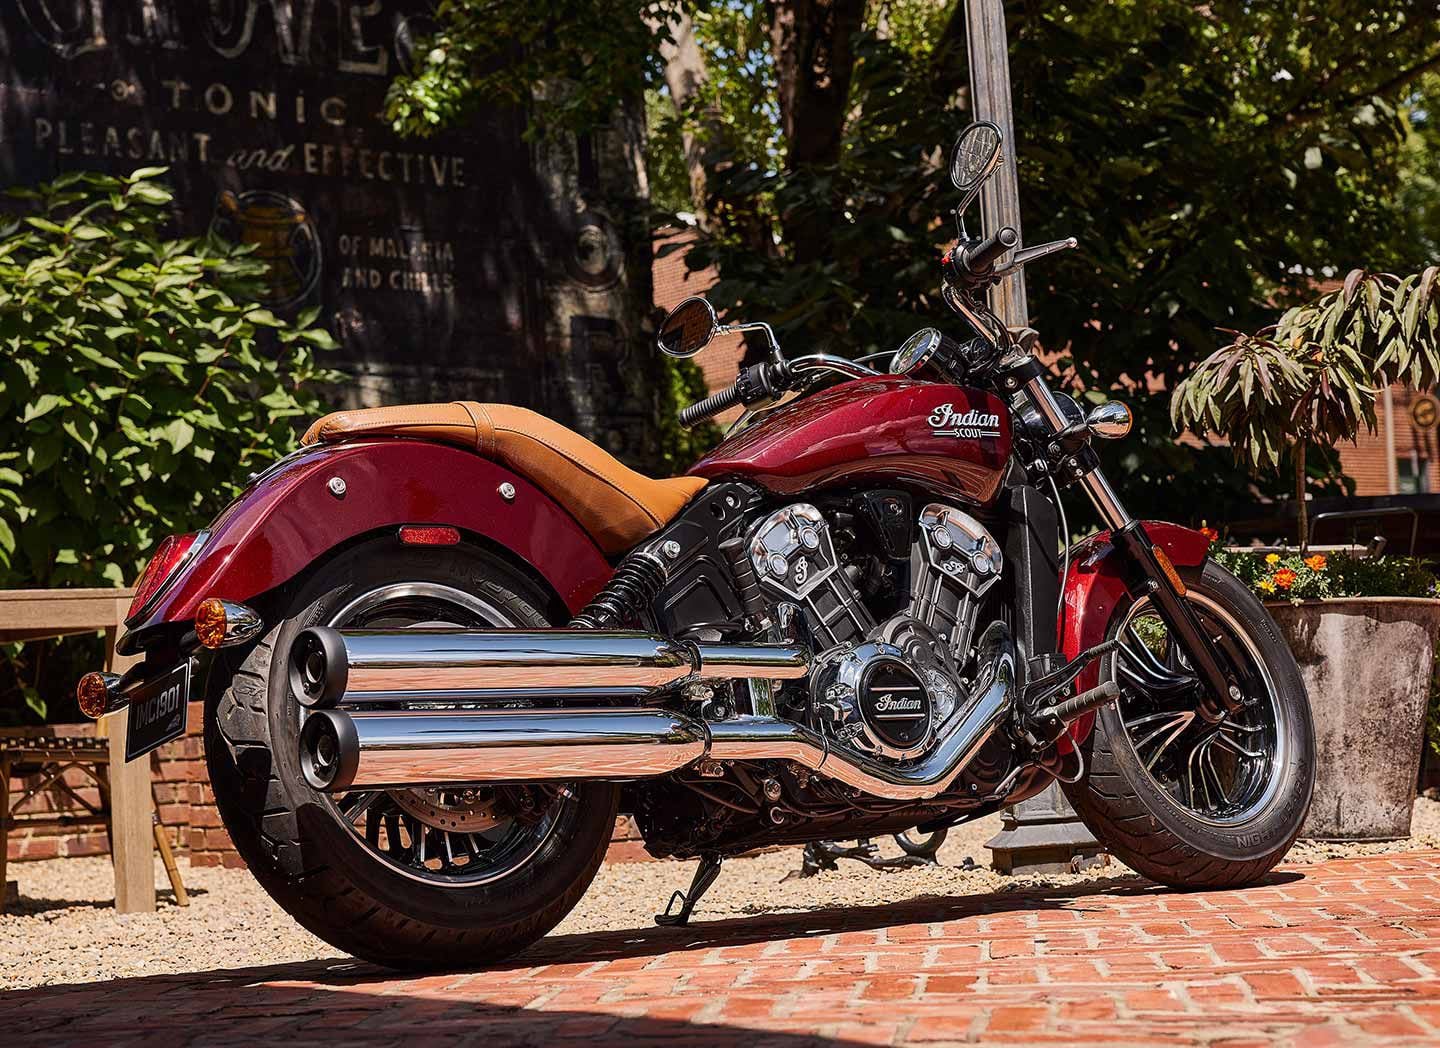 For 2024, the Indian Scout continues rolling with a liquid-cooled 1,133cc V-twin that spits out 100 hp and 72 lb.-ft. of torque. The base model in Black Metallic without ABS is priced at $13,249—the same as last year. You can also choose from Silver Quartz Metallic; Maroon Metallic (seen here); Spirit Blue Metallic over Black Metallic; Black Metallic over Silver Quartz Metallic; and Copper Metallic over Black Metallic colors.